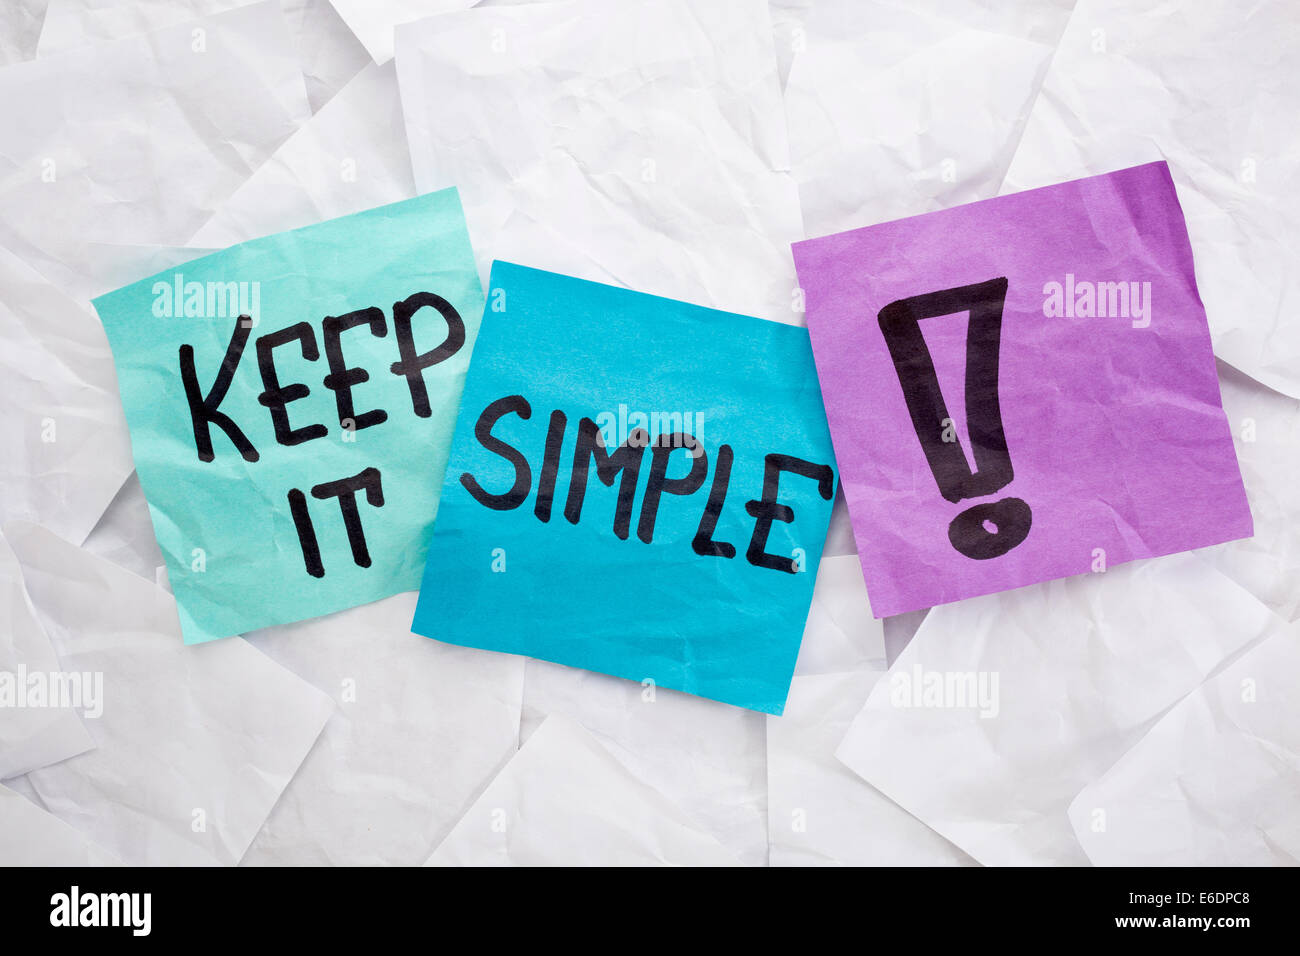 keep it simple - reminder or advice handwritten on colorful sticky notes Stock Photo